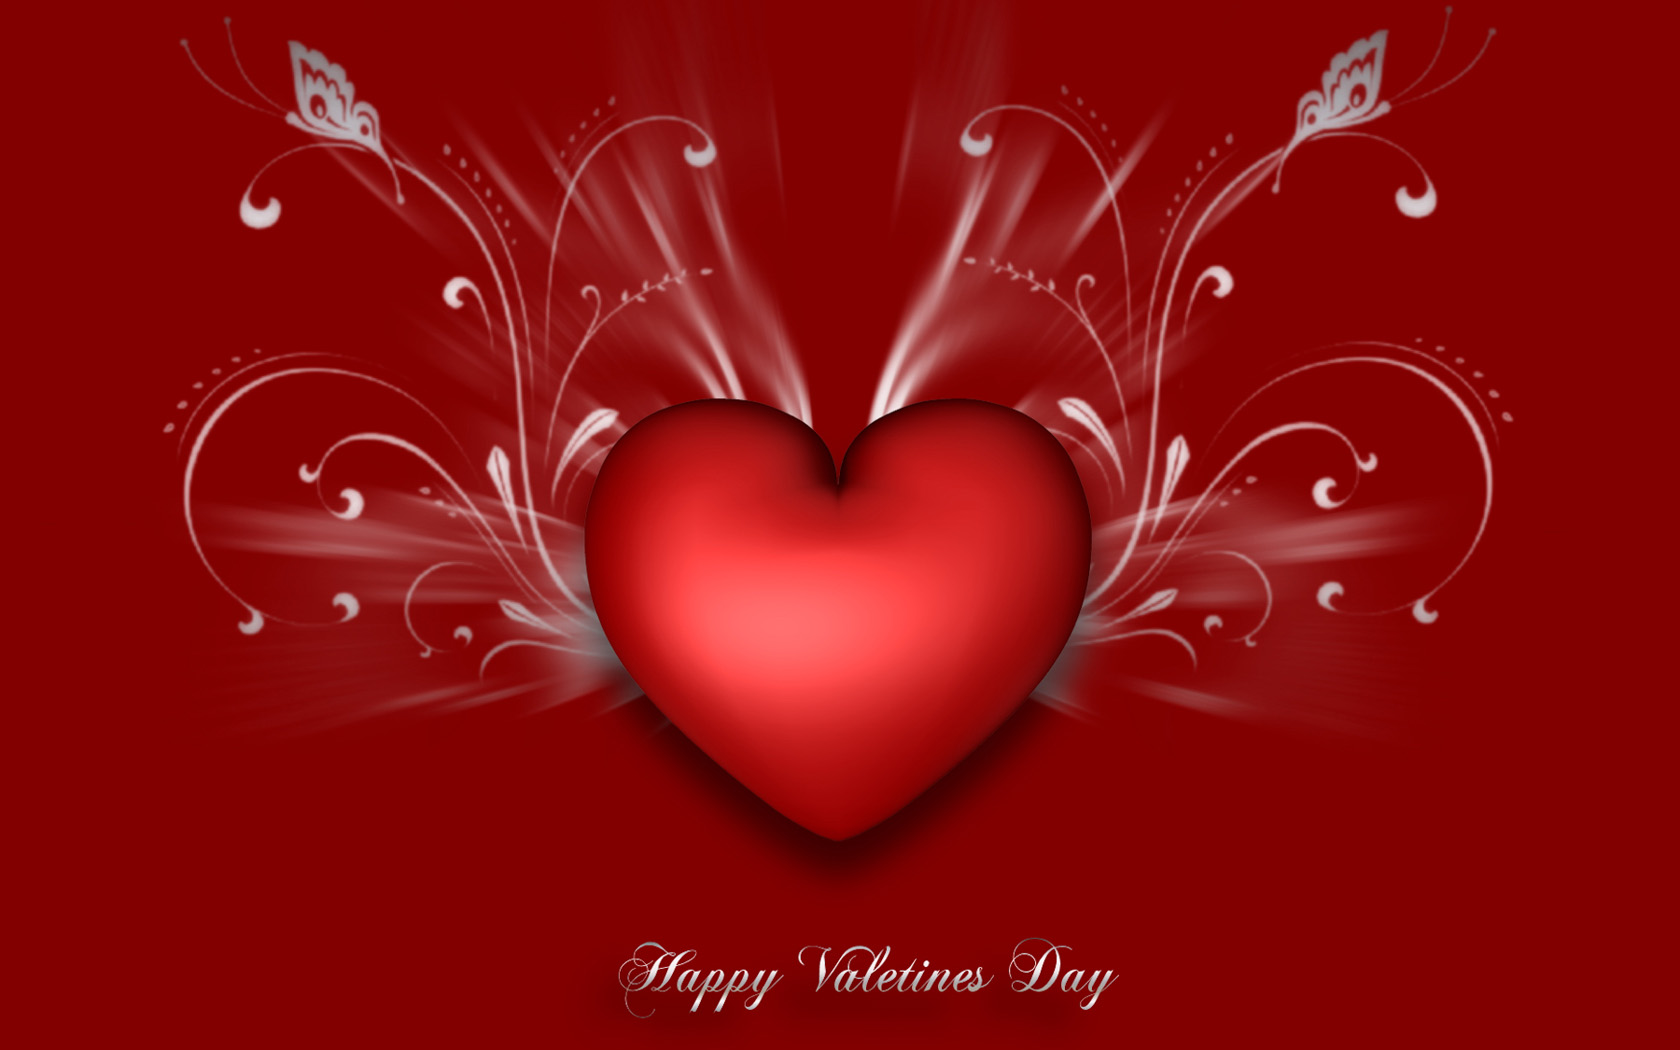 SMS offer to secure Valentines Day bookings - Phorest Blog